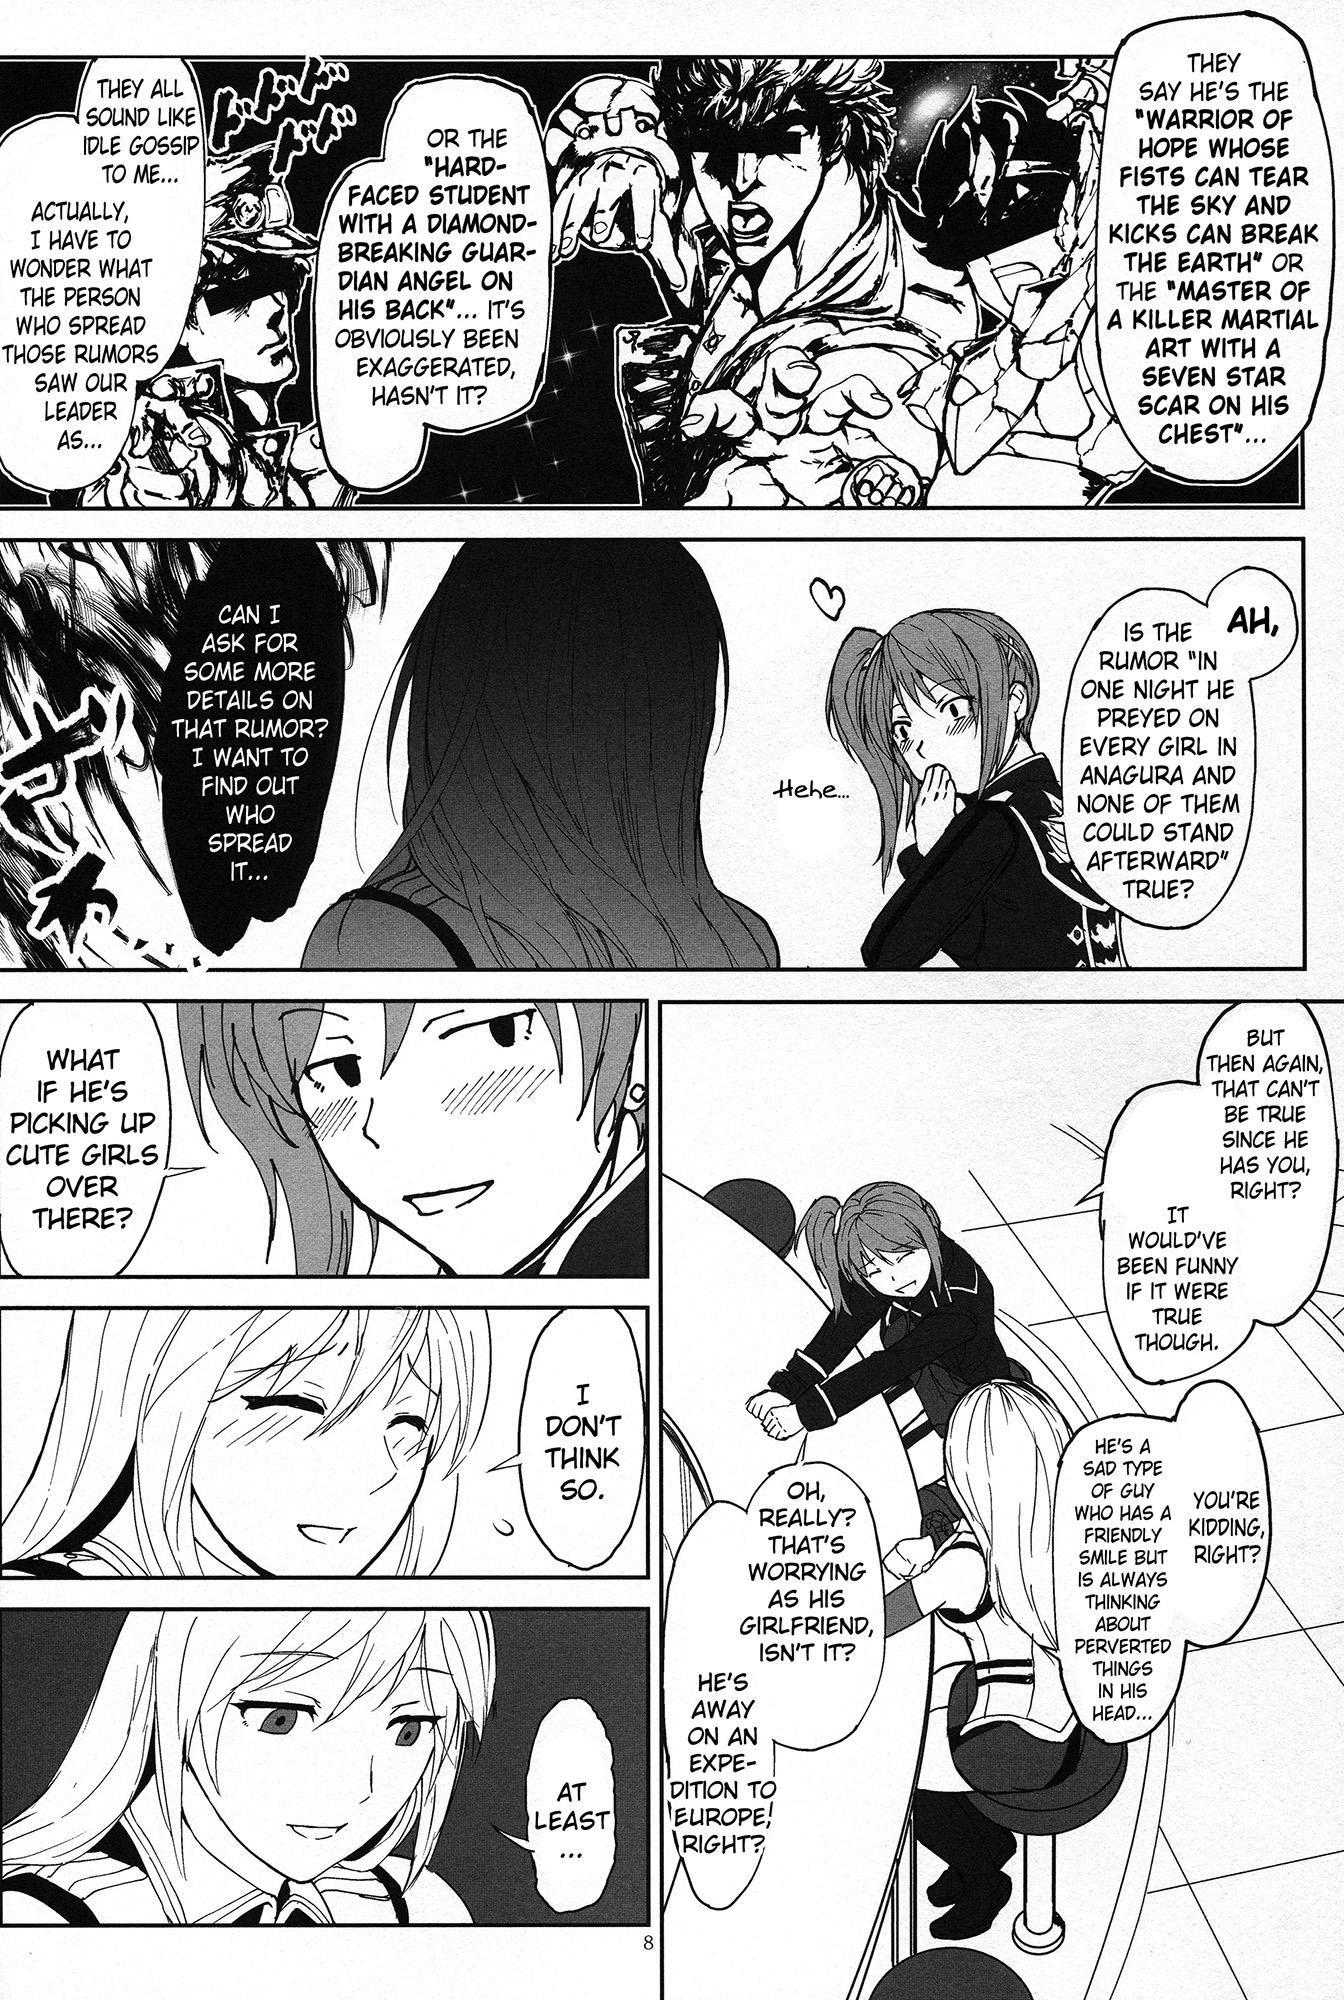 Sex Party Again #2 "Flashback Memories" - God eater Jerk Off - Page 7